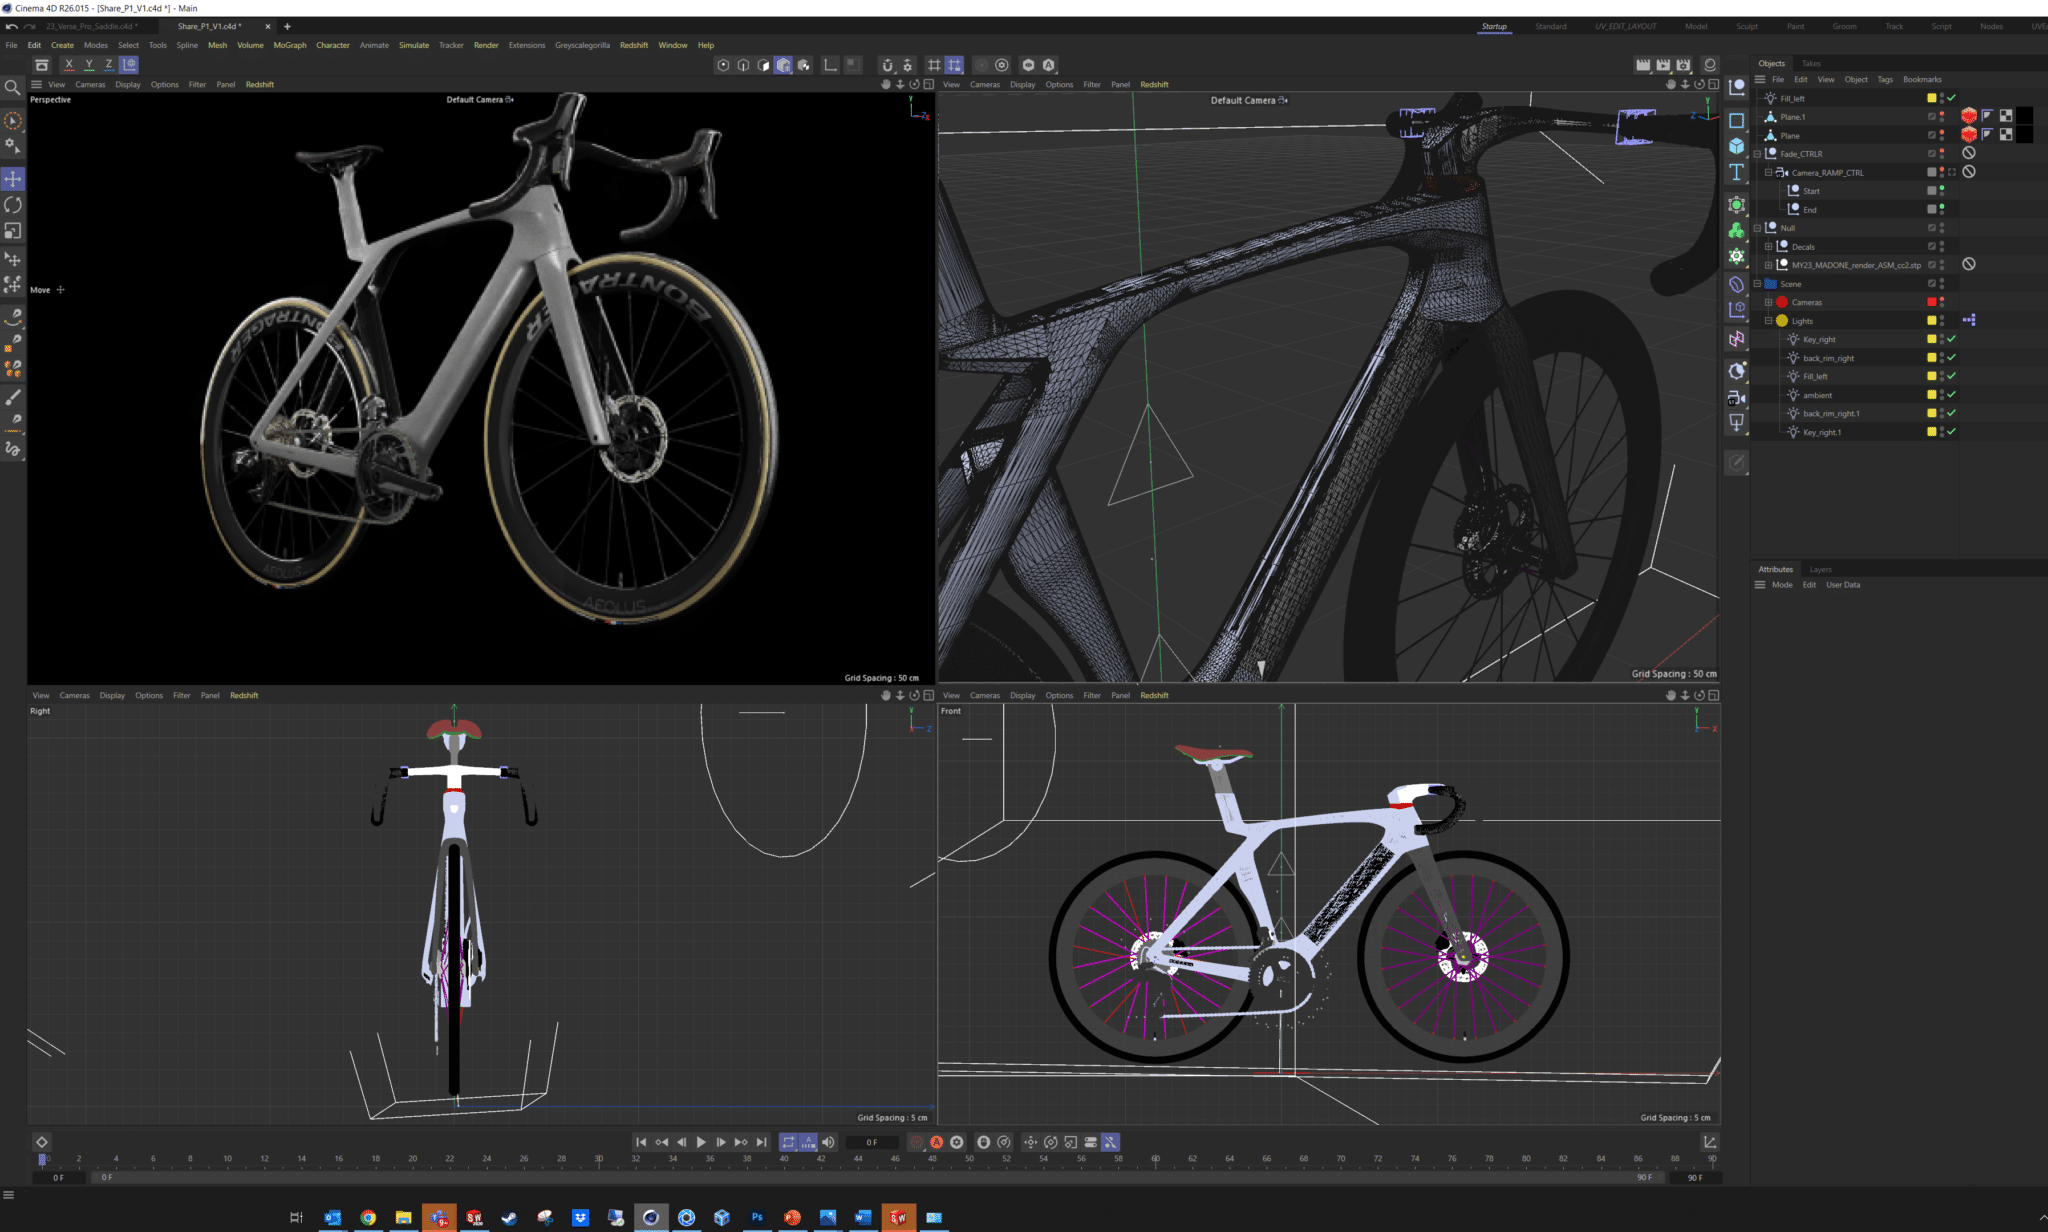 Trek Bicycle Competes in Tour de France With Bikes Developed Using NVIDIA GPUs NVIDIA Blog